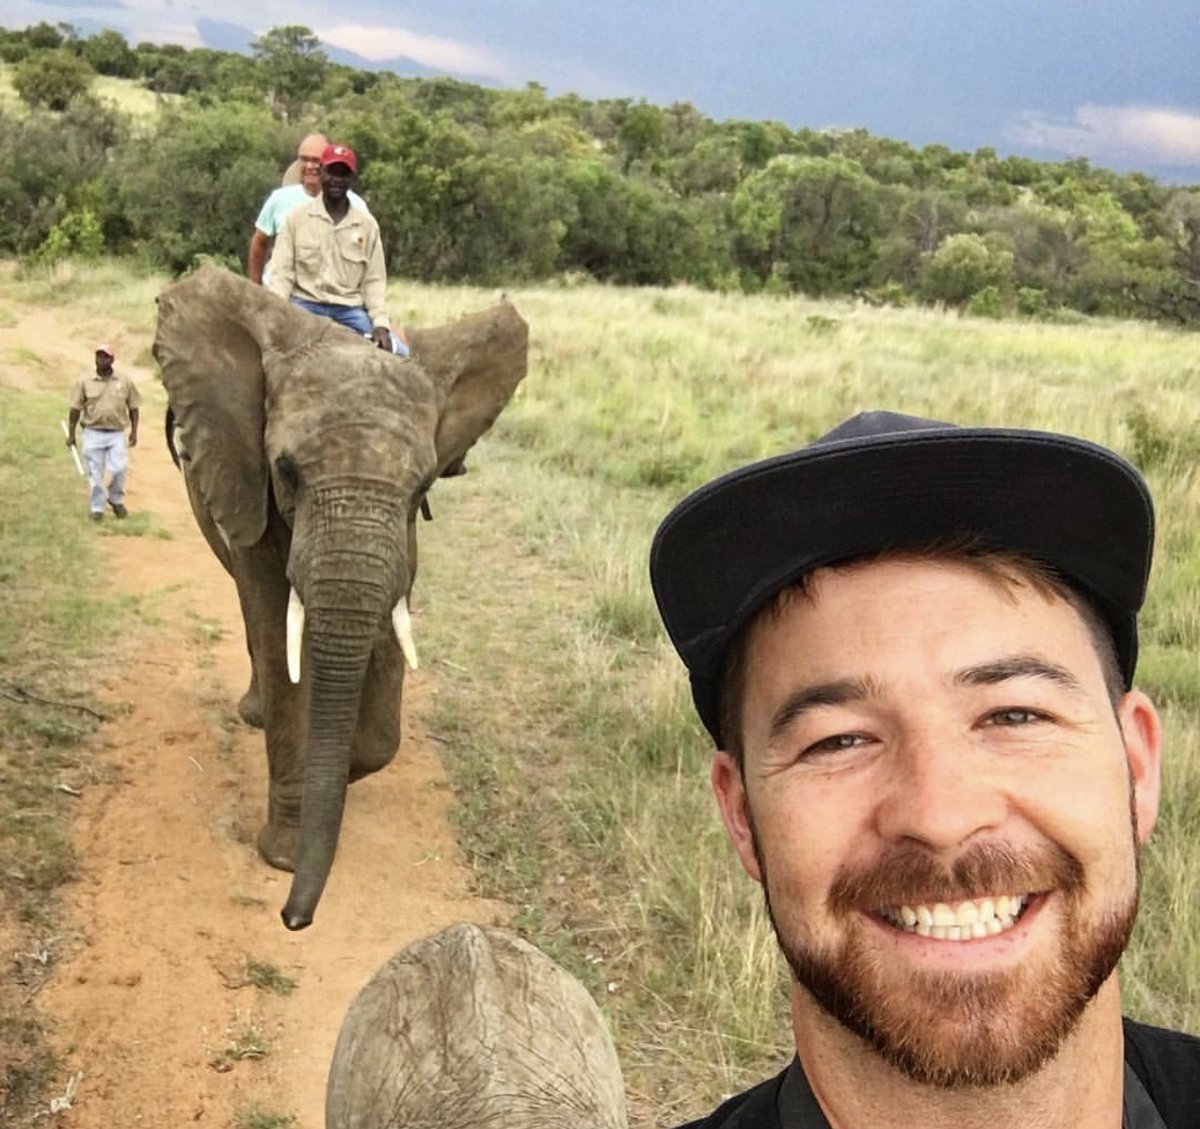 5. The Hensman family knows how bad some of their practices are. It's been years since they've posted elephant riding on their social media (none on IG, some on FB). But they offer elephant riding which is a cruel and abusive practice. Adventures IG:  https://bit.ly/3hFPJGK 